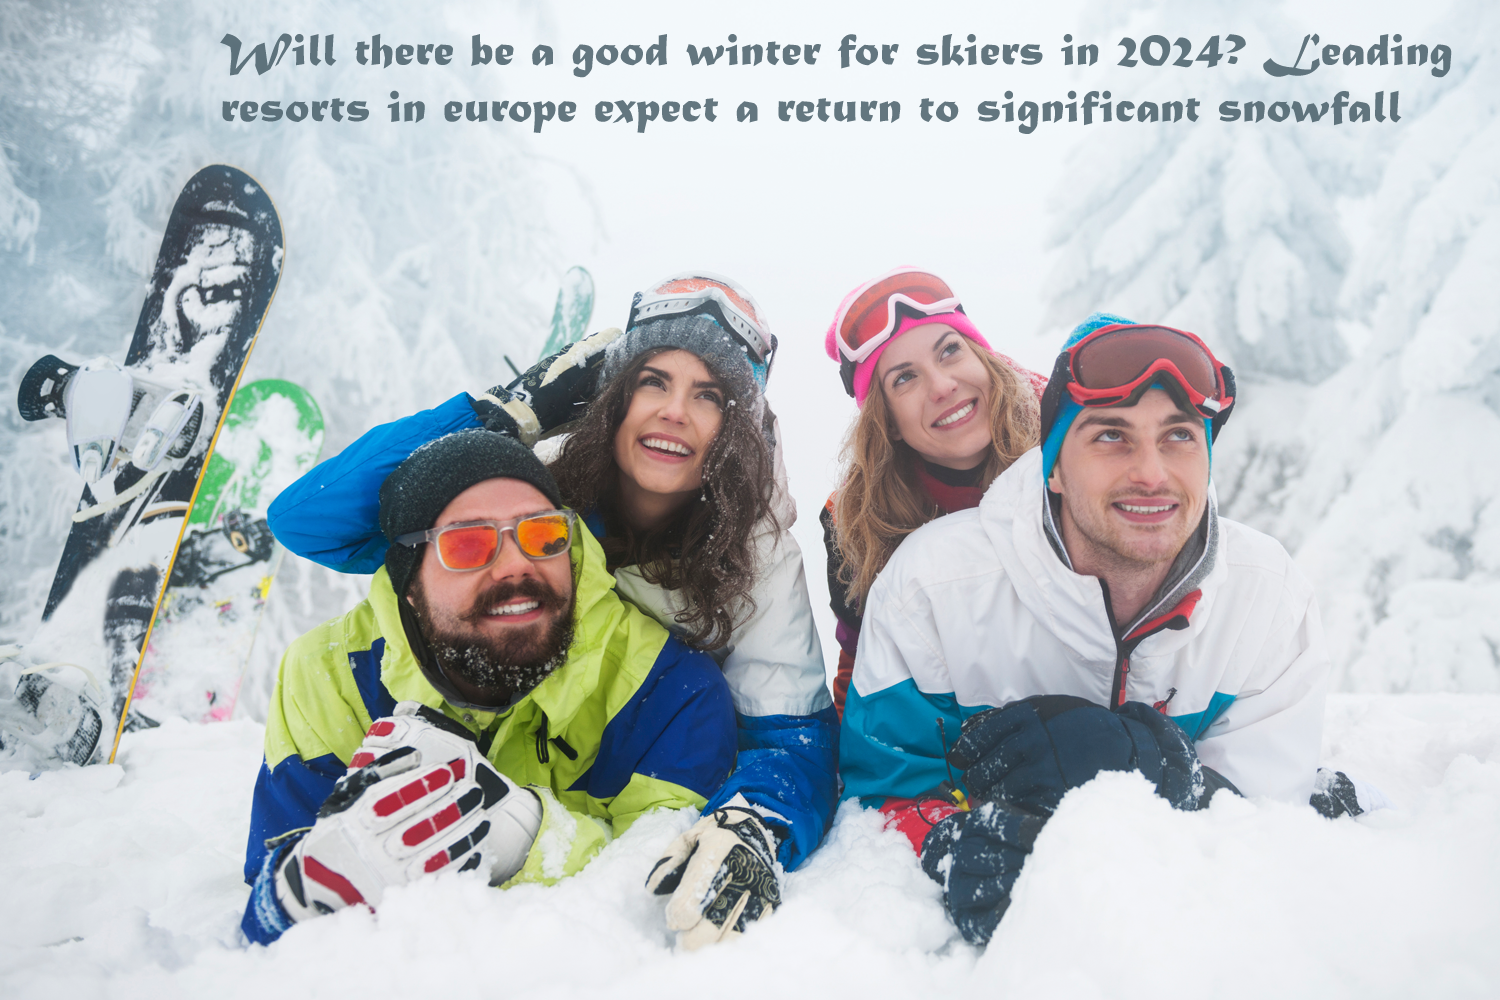 Will there be a good winter for skiers in 2024? Leading resorts in europe expect a return to significant snowfall